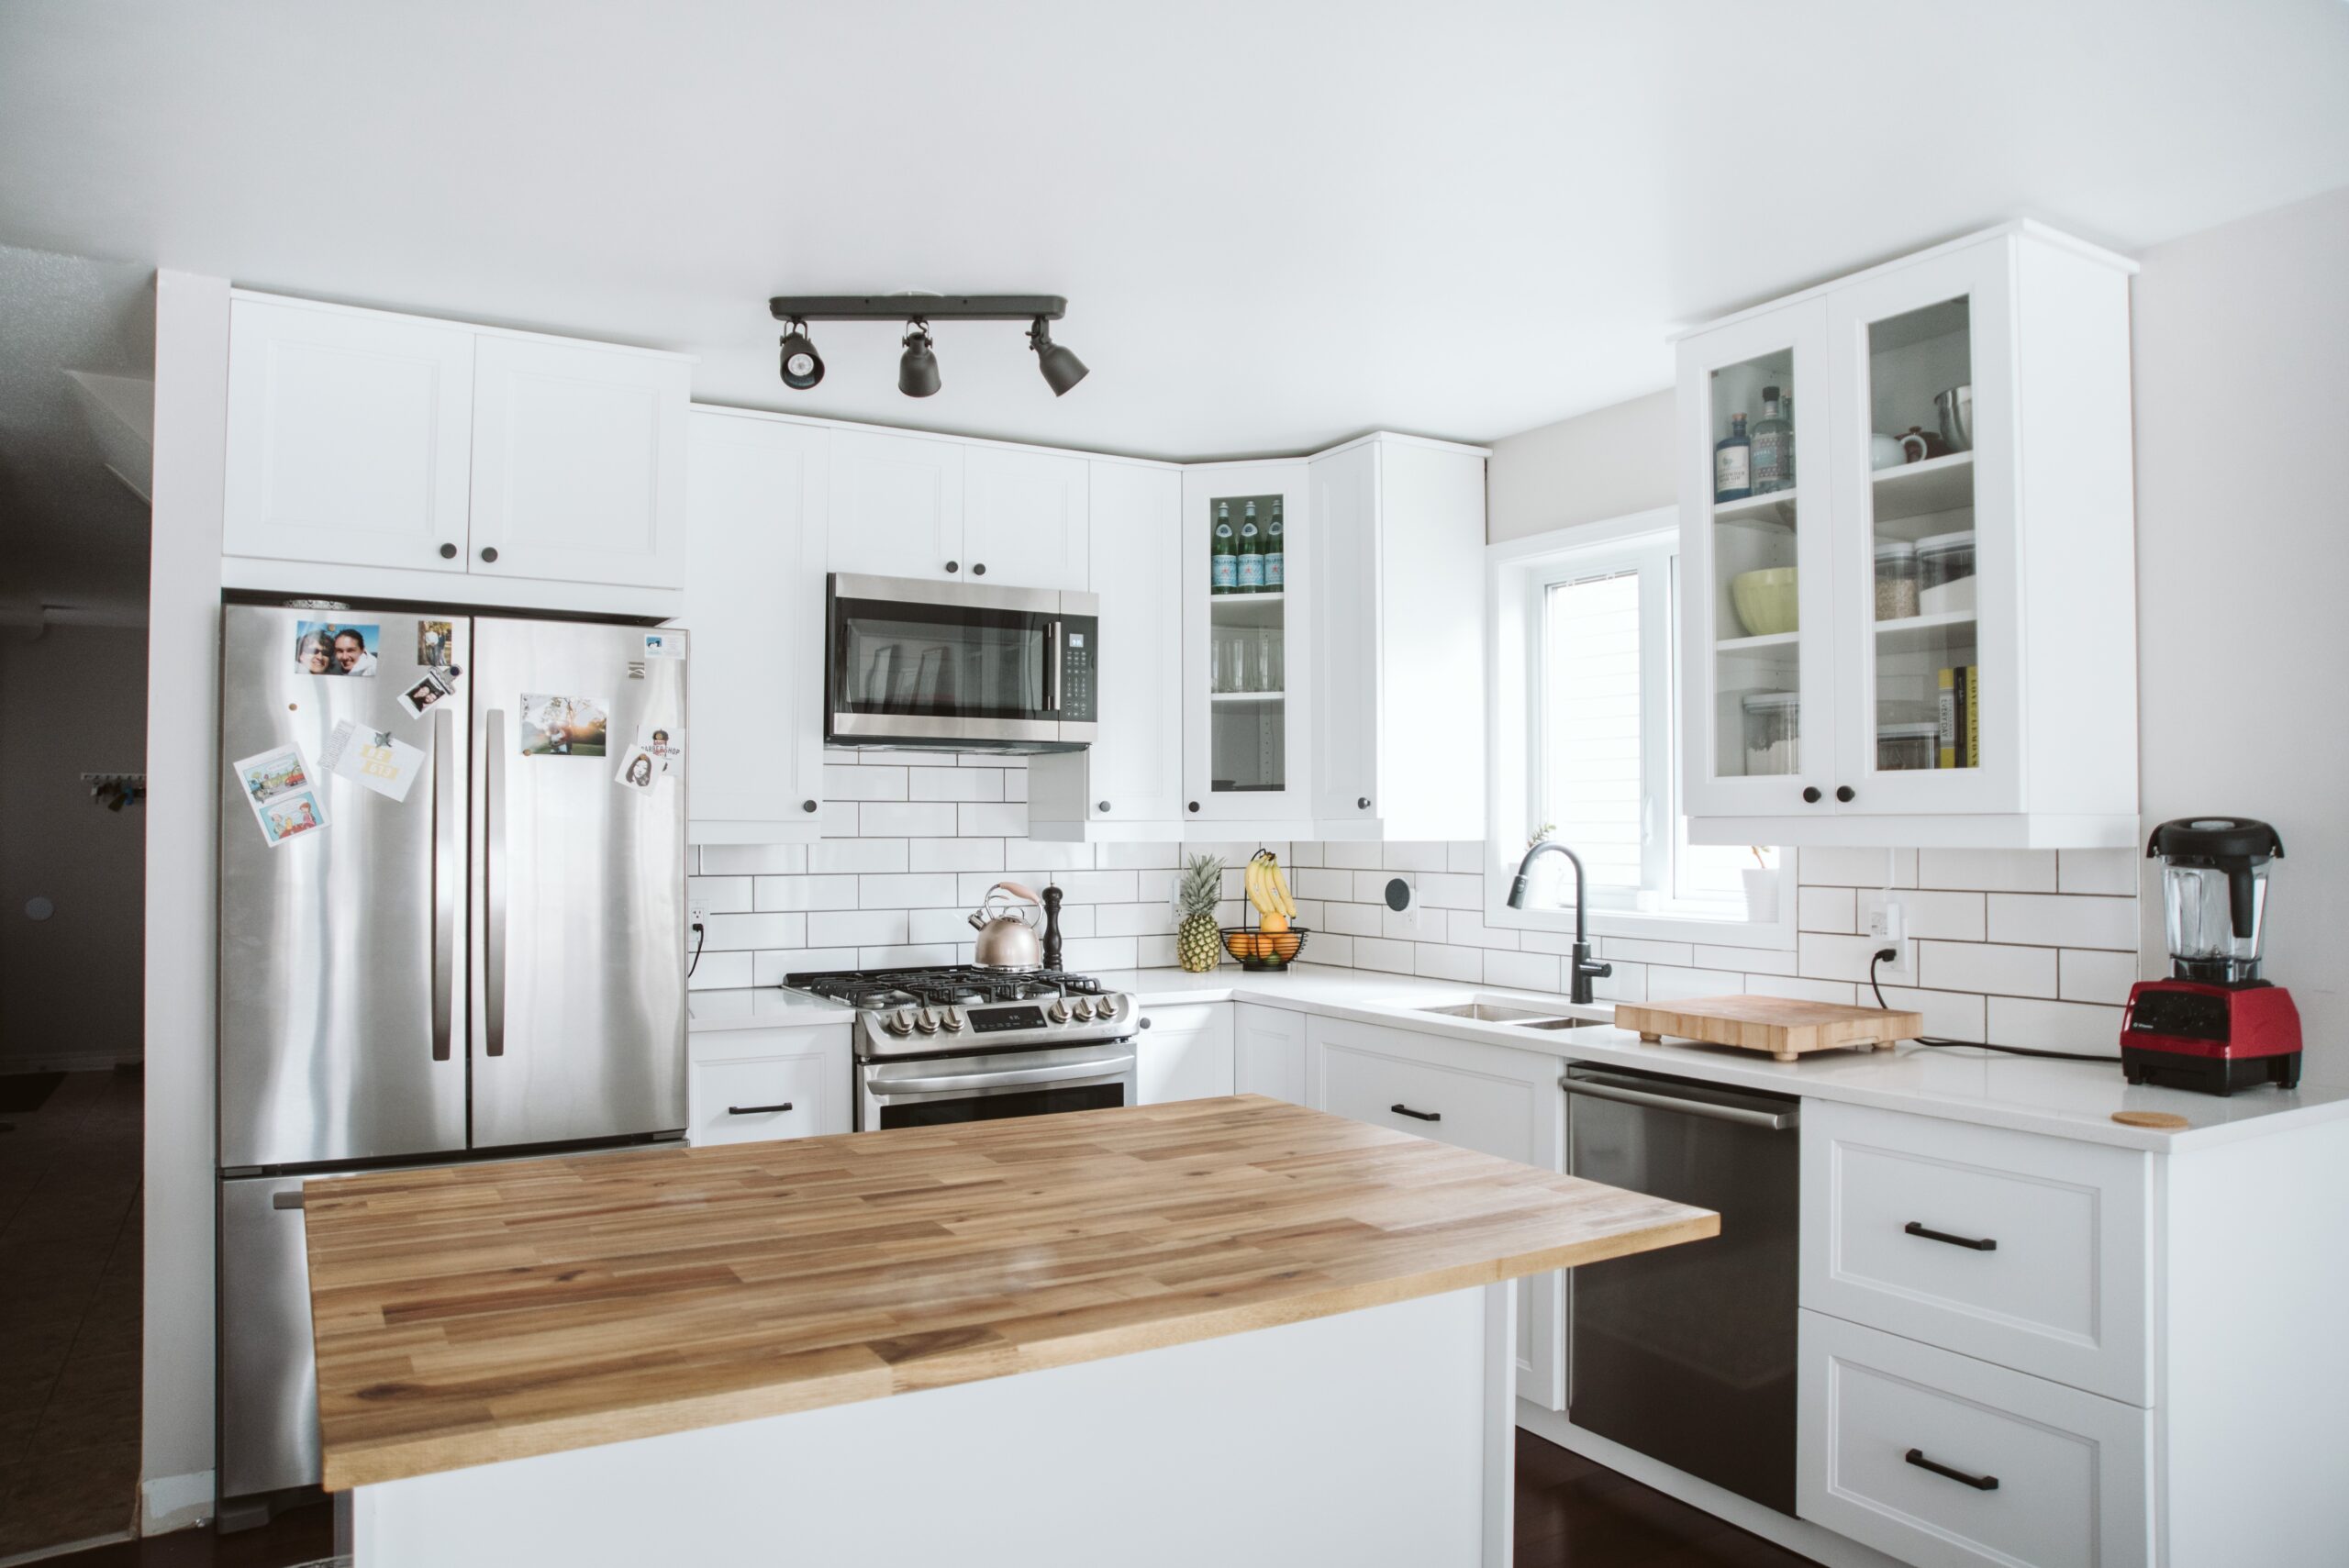 How Much Does an IKEA Kitchen Cost? (Plus Lessons Learned!) - how much is an ikea kitchen?